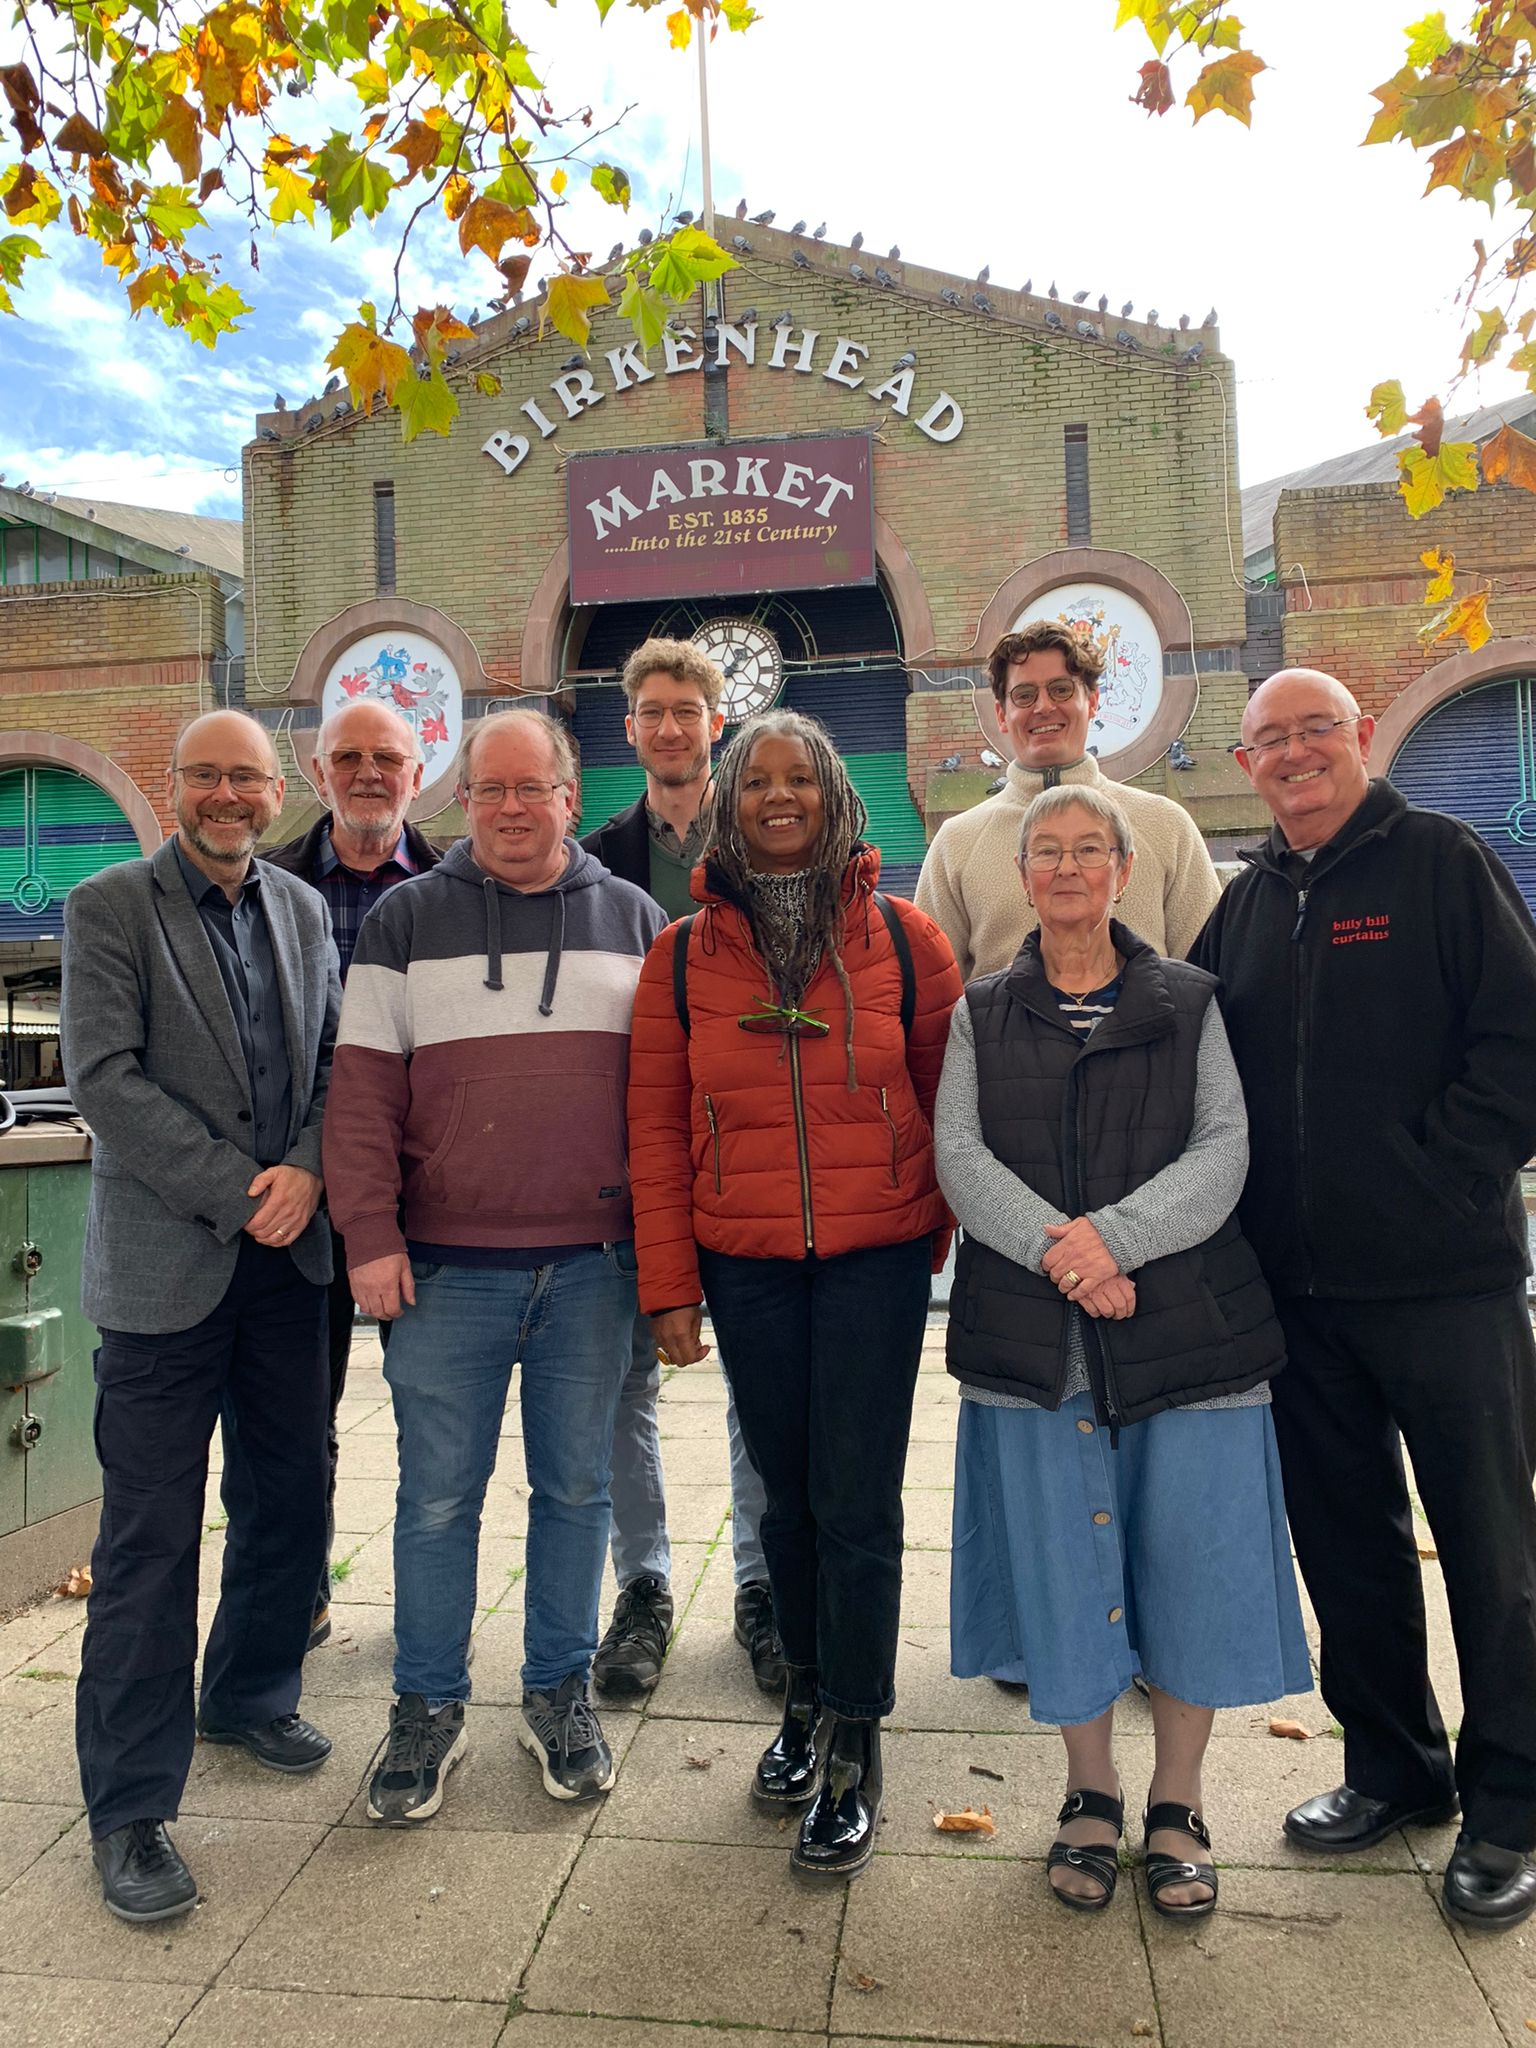 Birkenhead and Tranmere councillors Pat Cleary, Ewan Tomeny and Amanda Onwuemene recently met with Birkenhead Market traders.